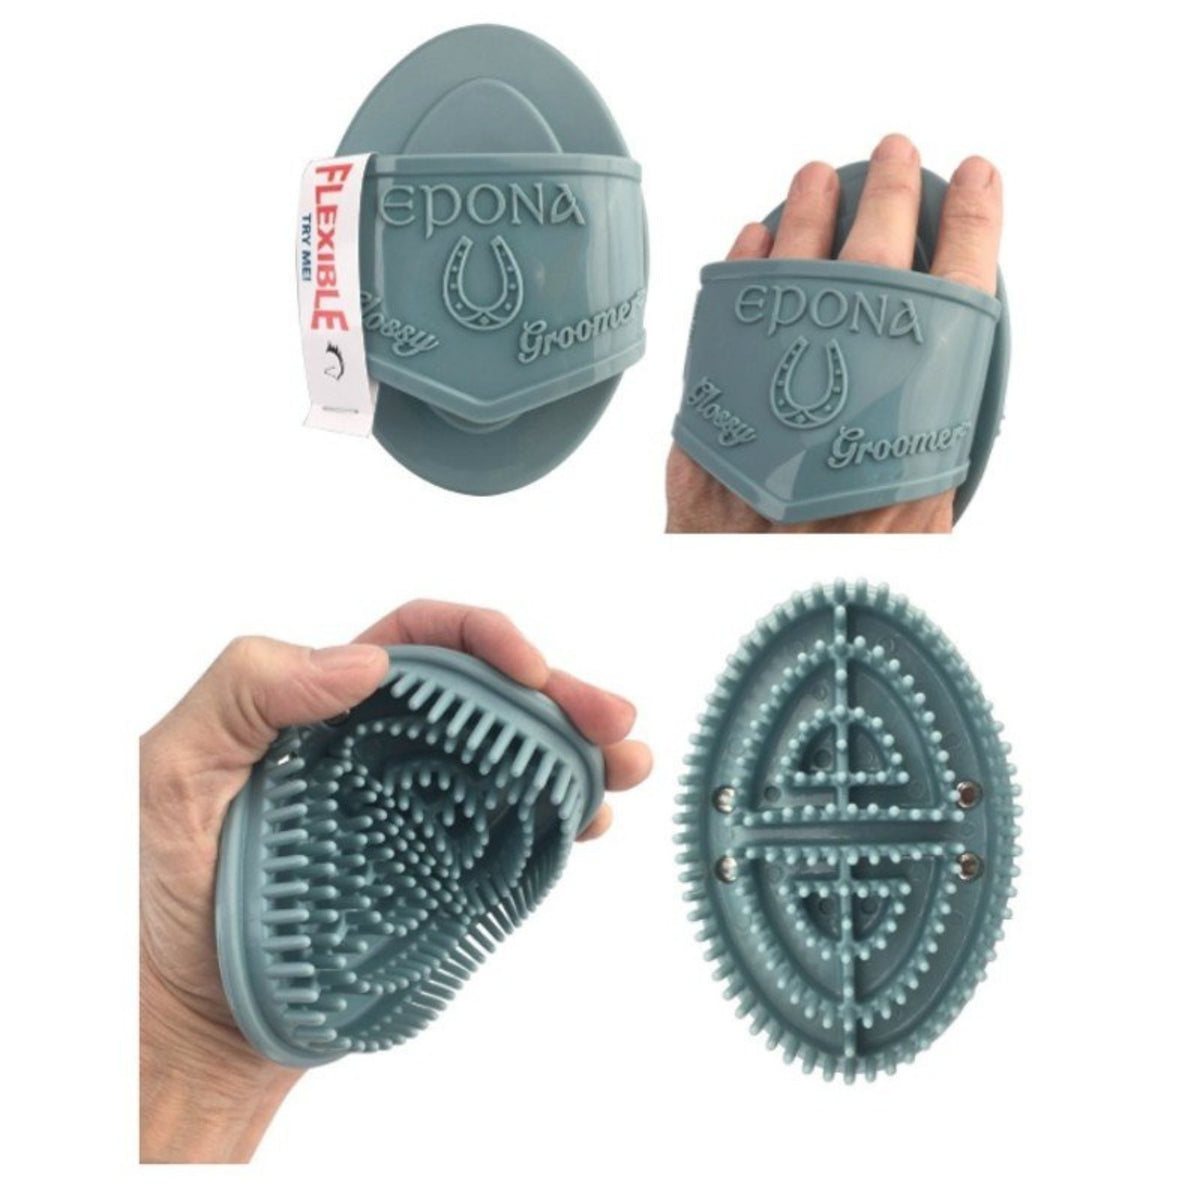 Four views of a rubber curry comb, with hand under silicone strap.